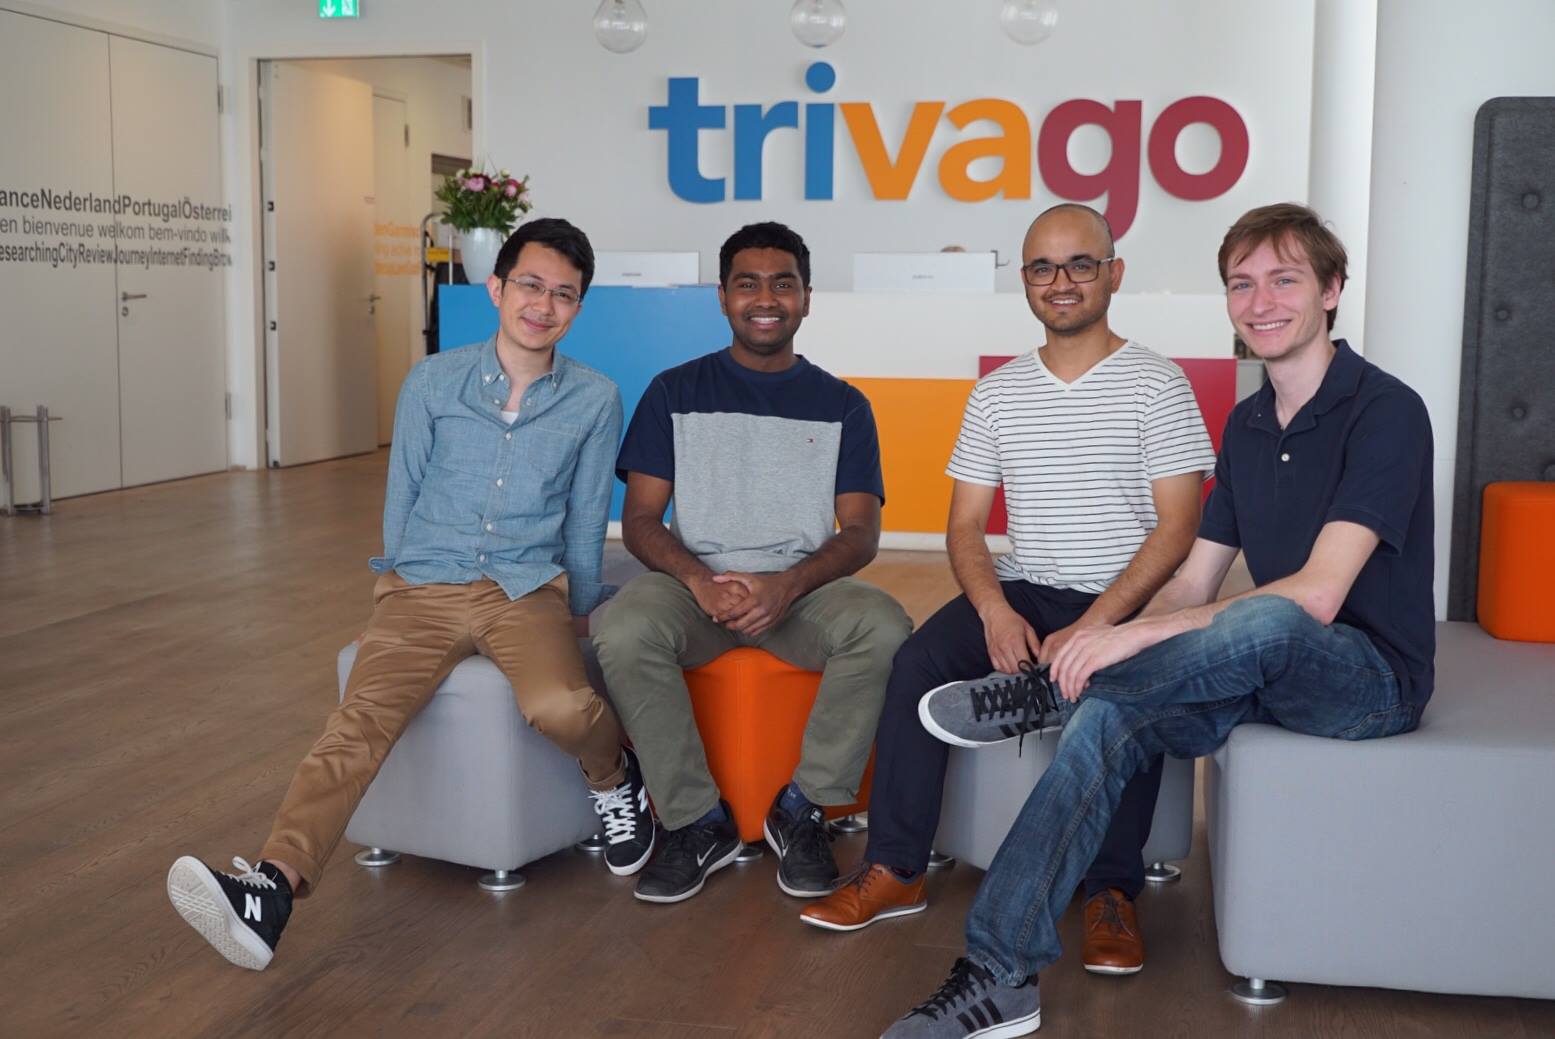 Interview with the Winners of trivago's New York Hackathon